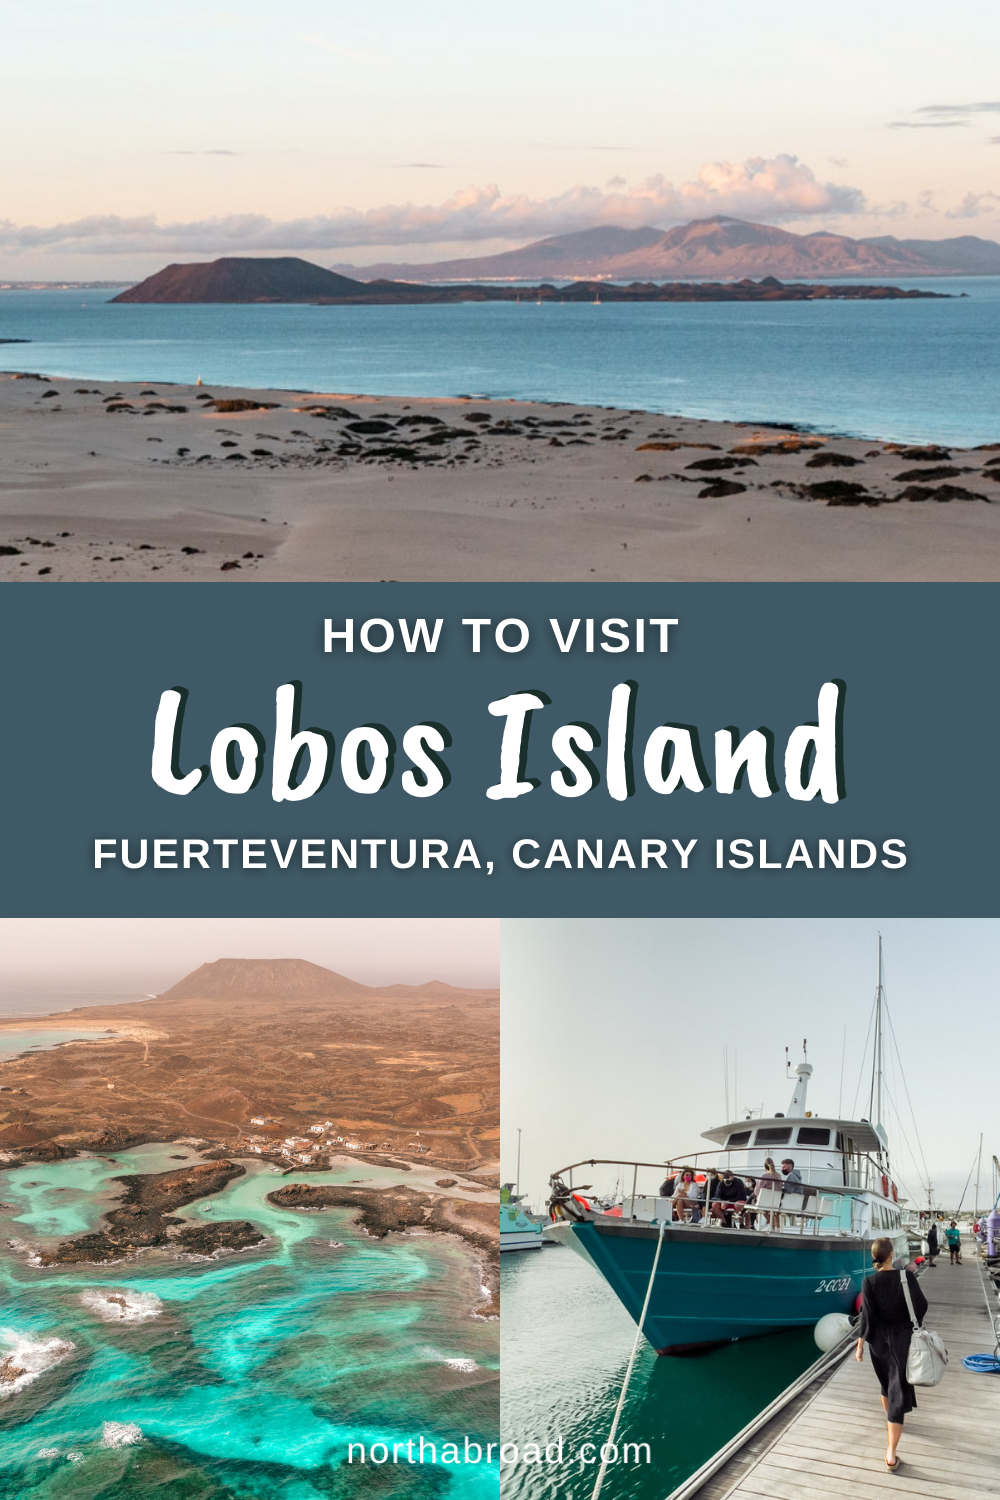 All you need to know about visiting Lobos Island from Fuerteventura or Lanzarote